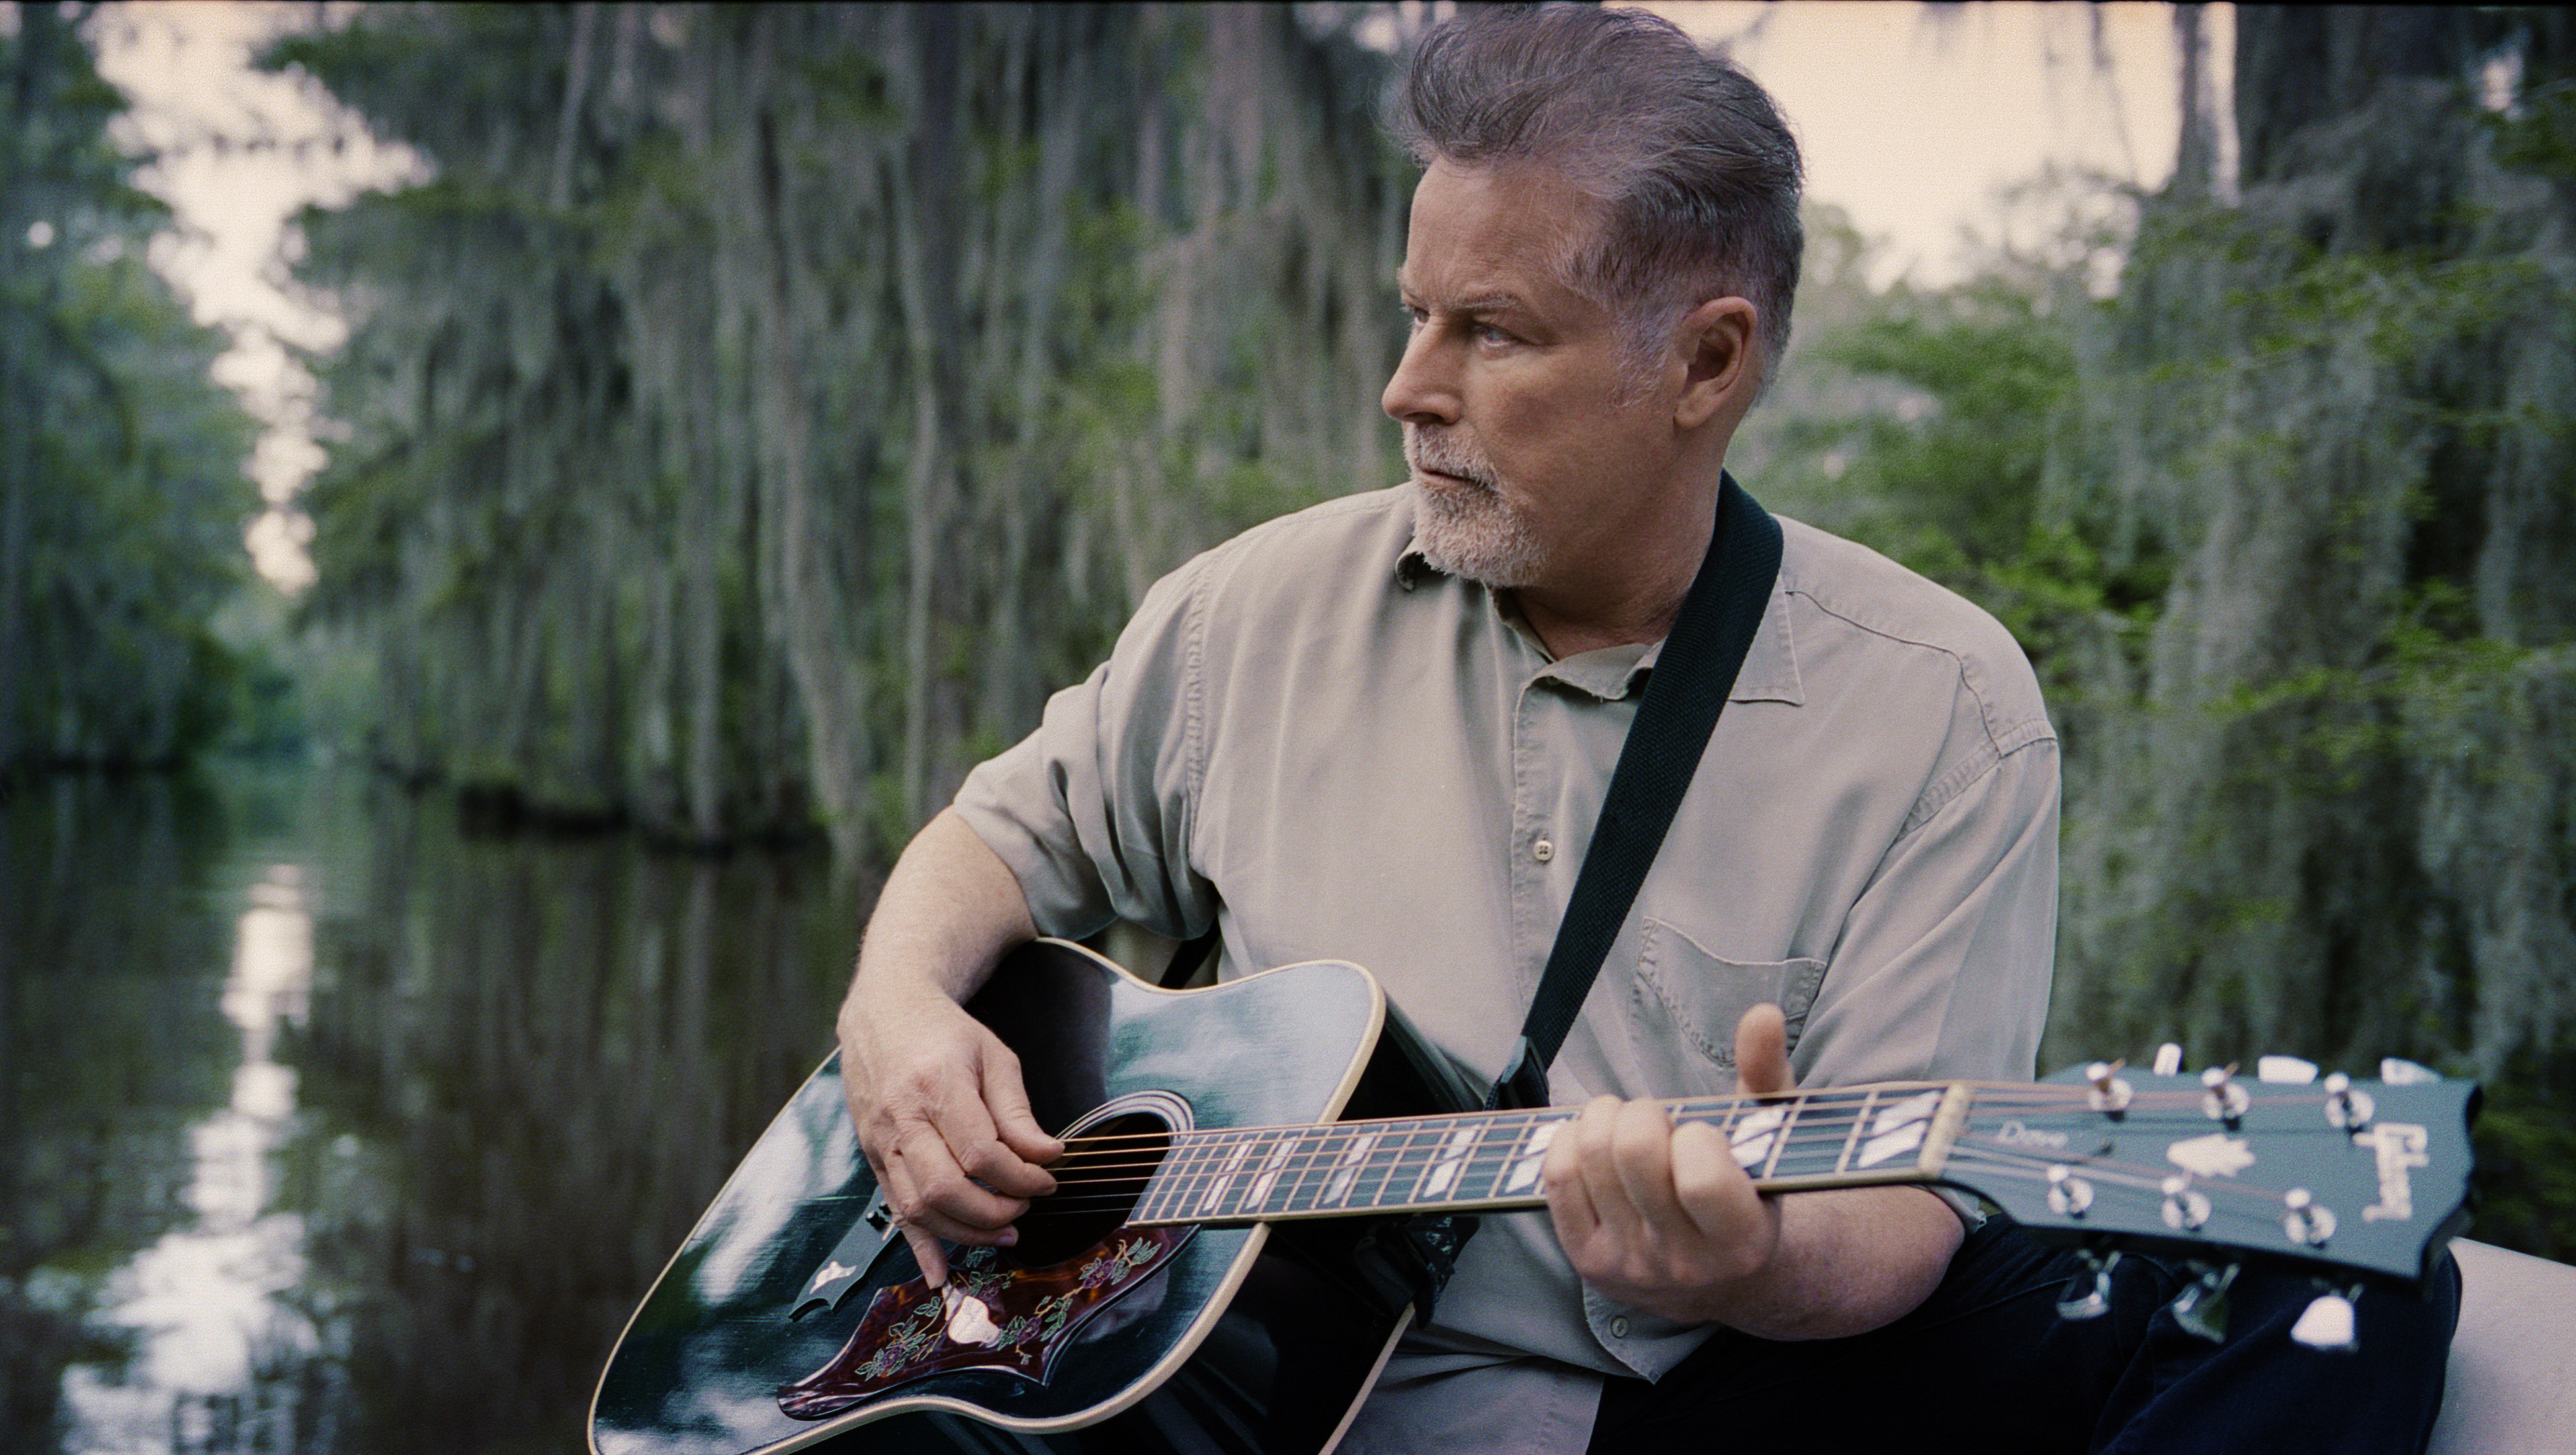 Don Henley, holding an acoustic guitar, sits amid a swamp